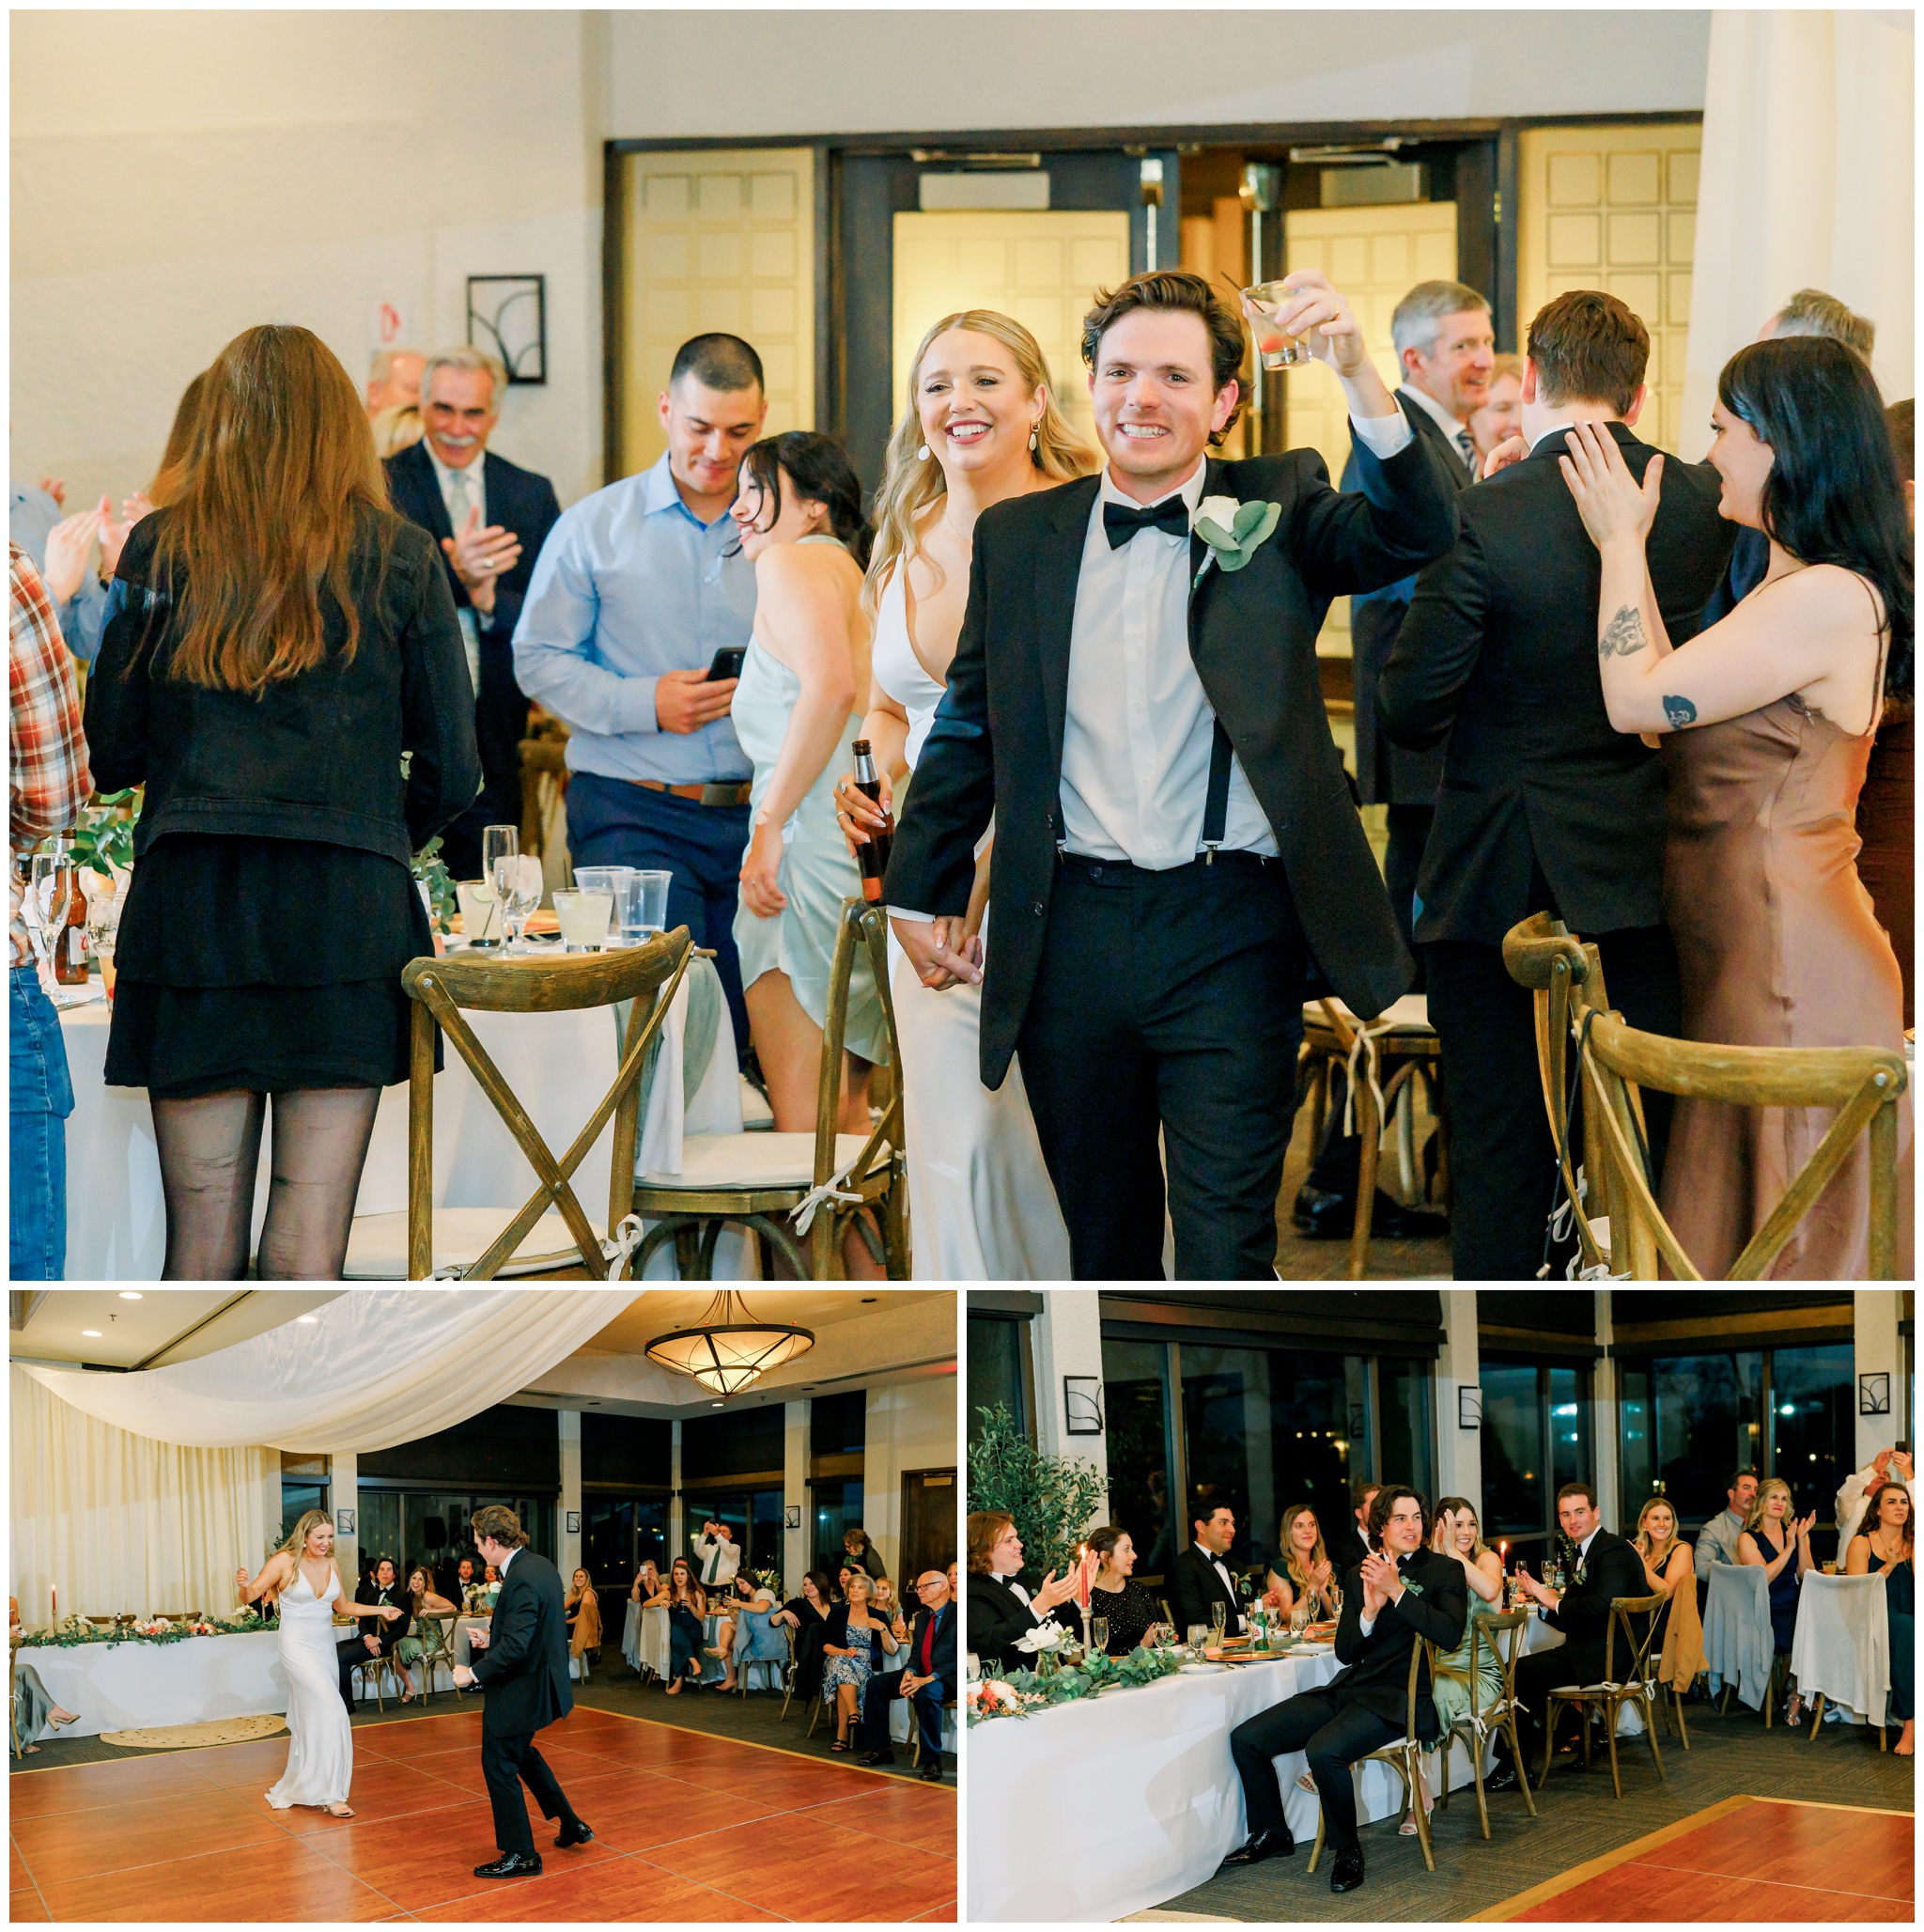 Bride and groom dancing at reception